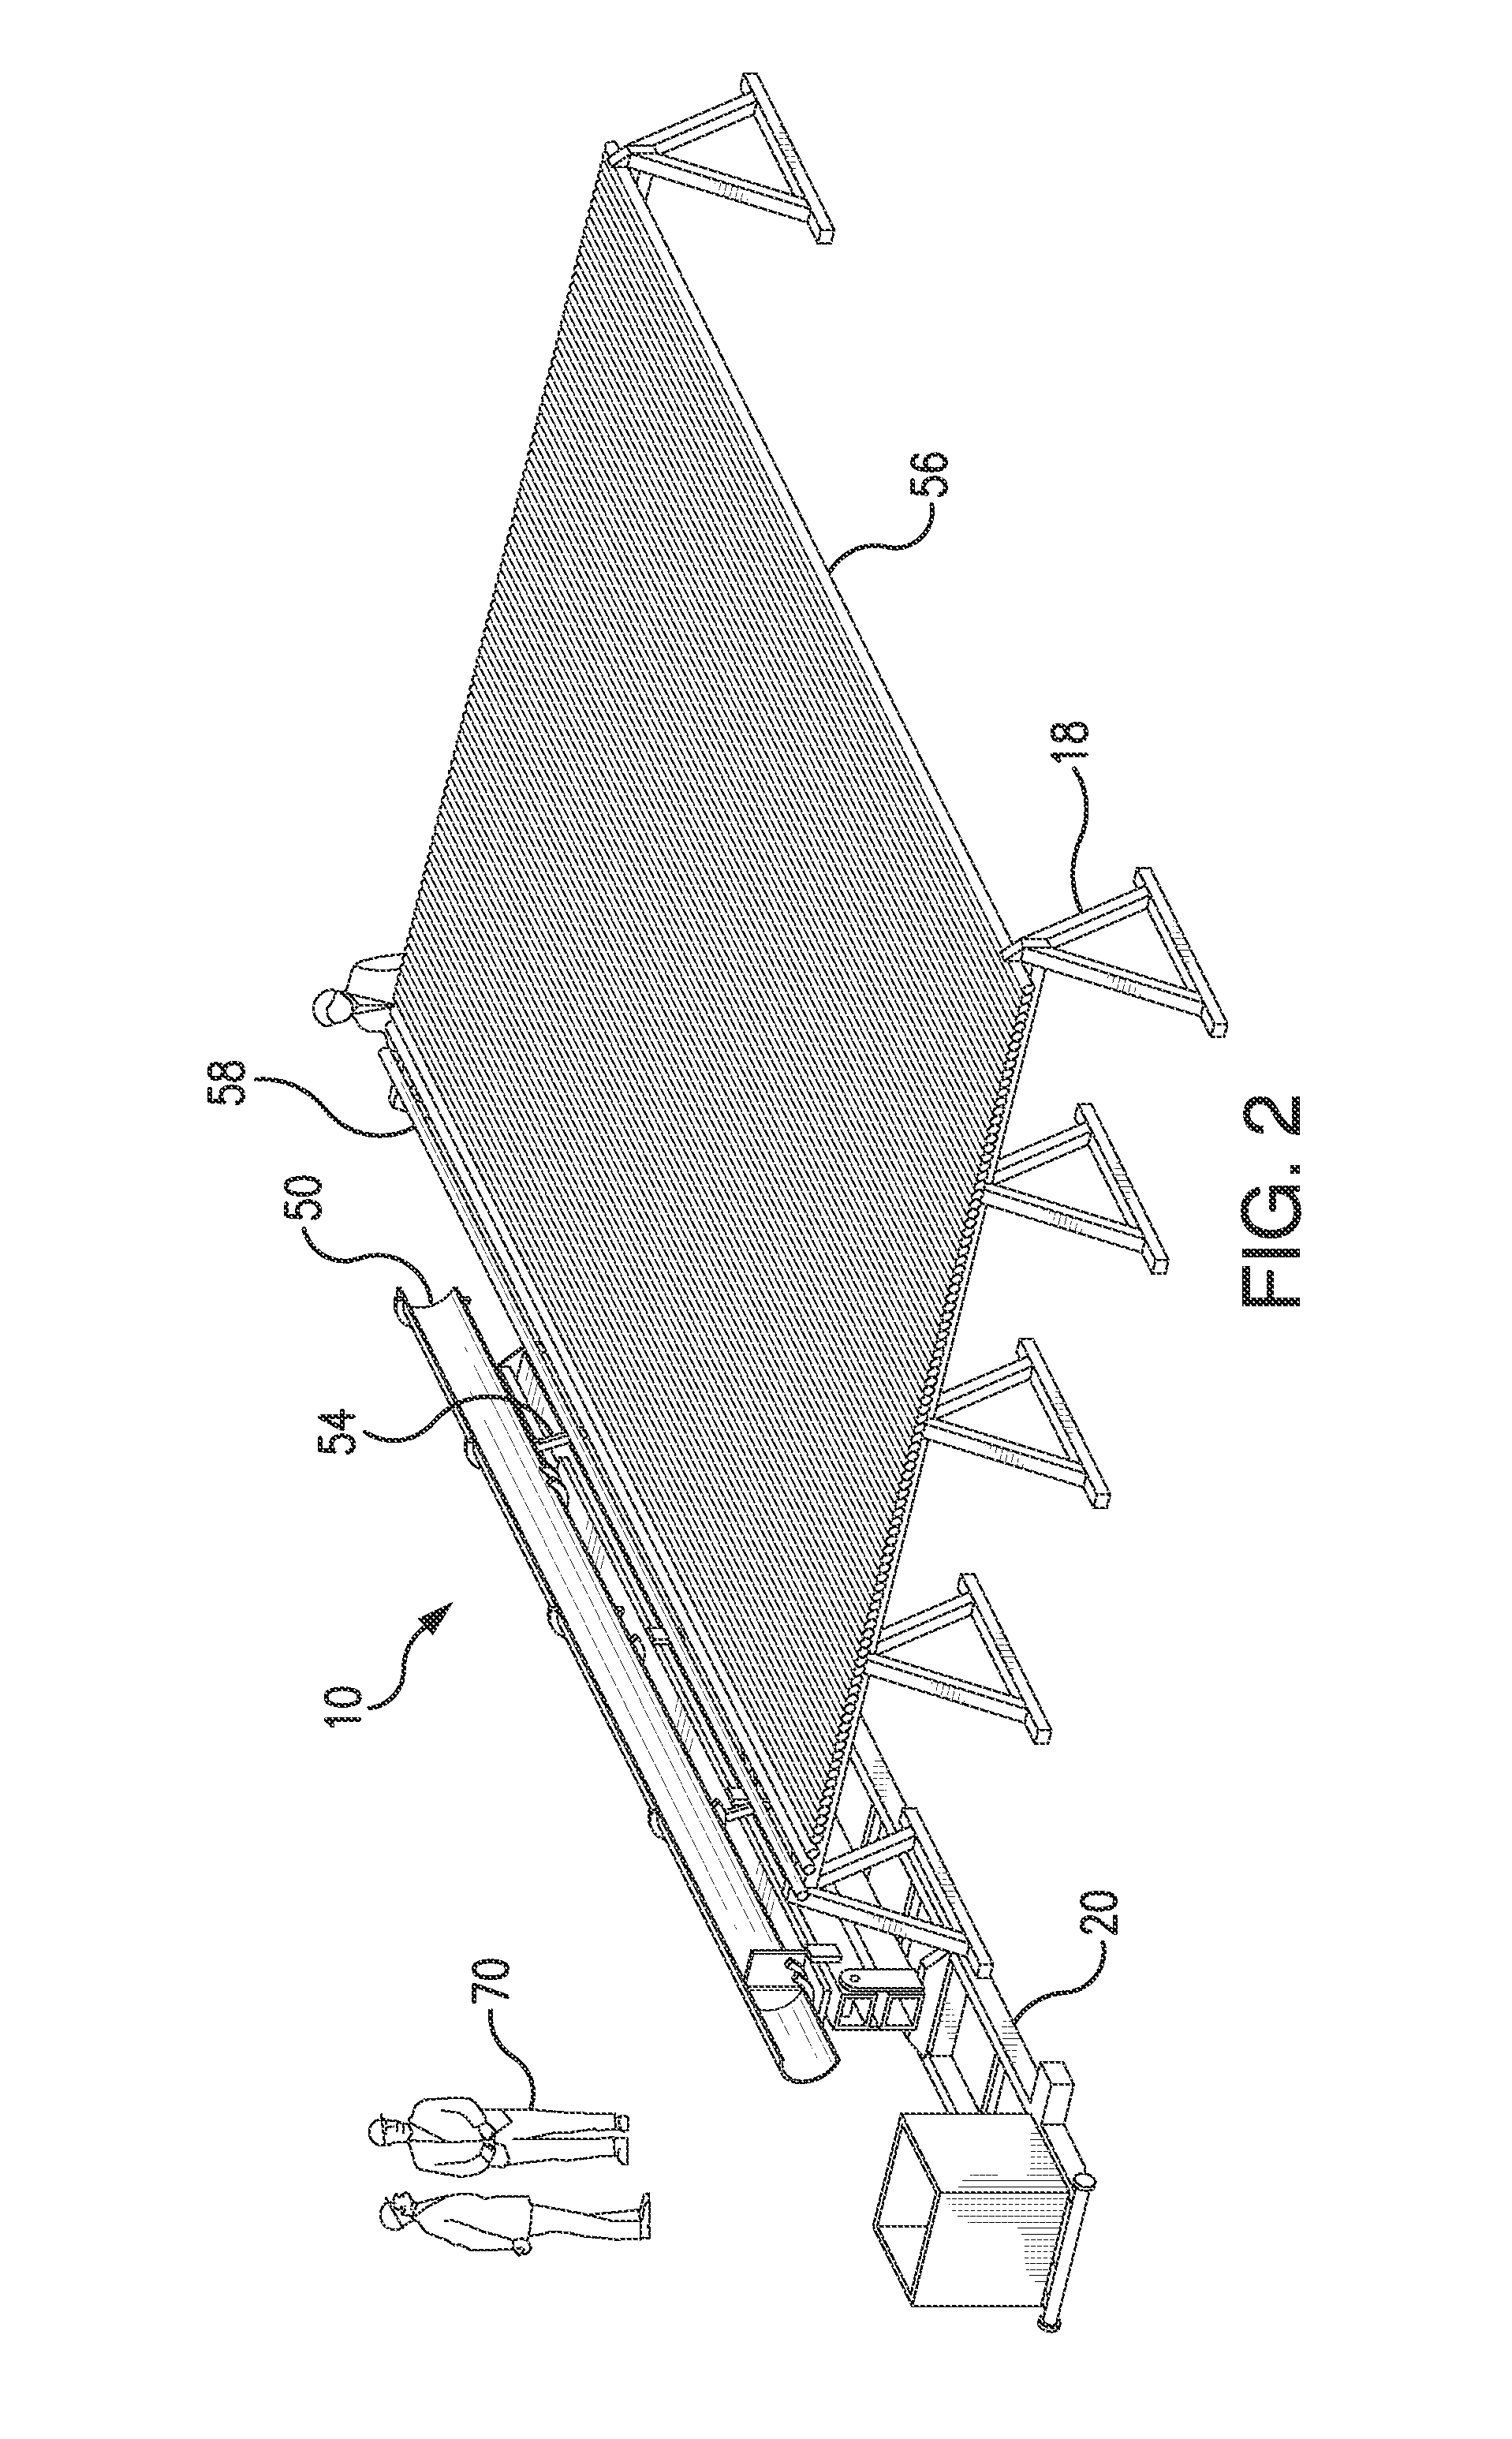 Pipe handling apparatus and method